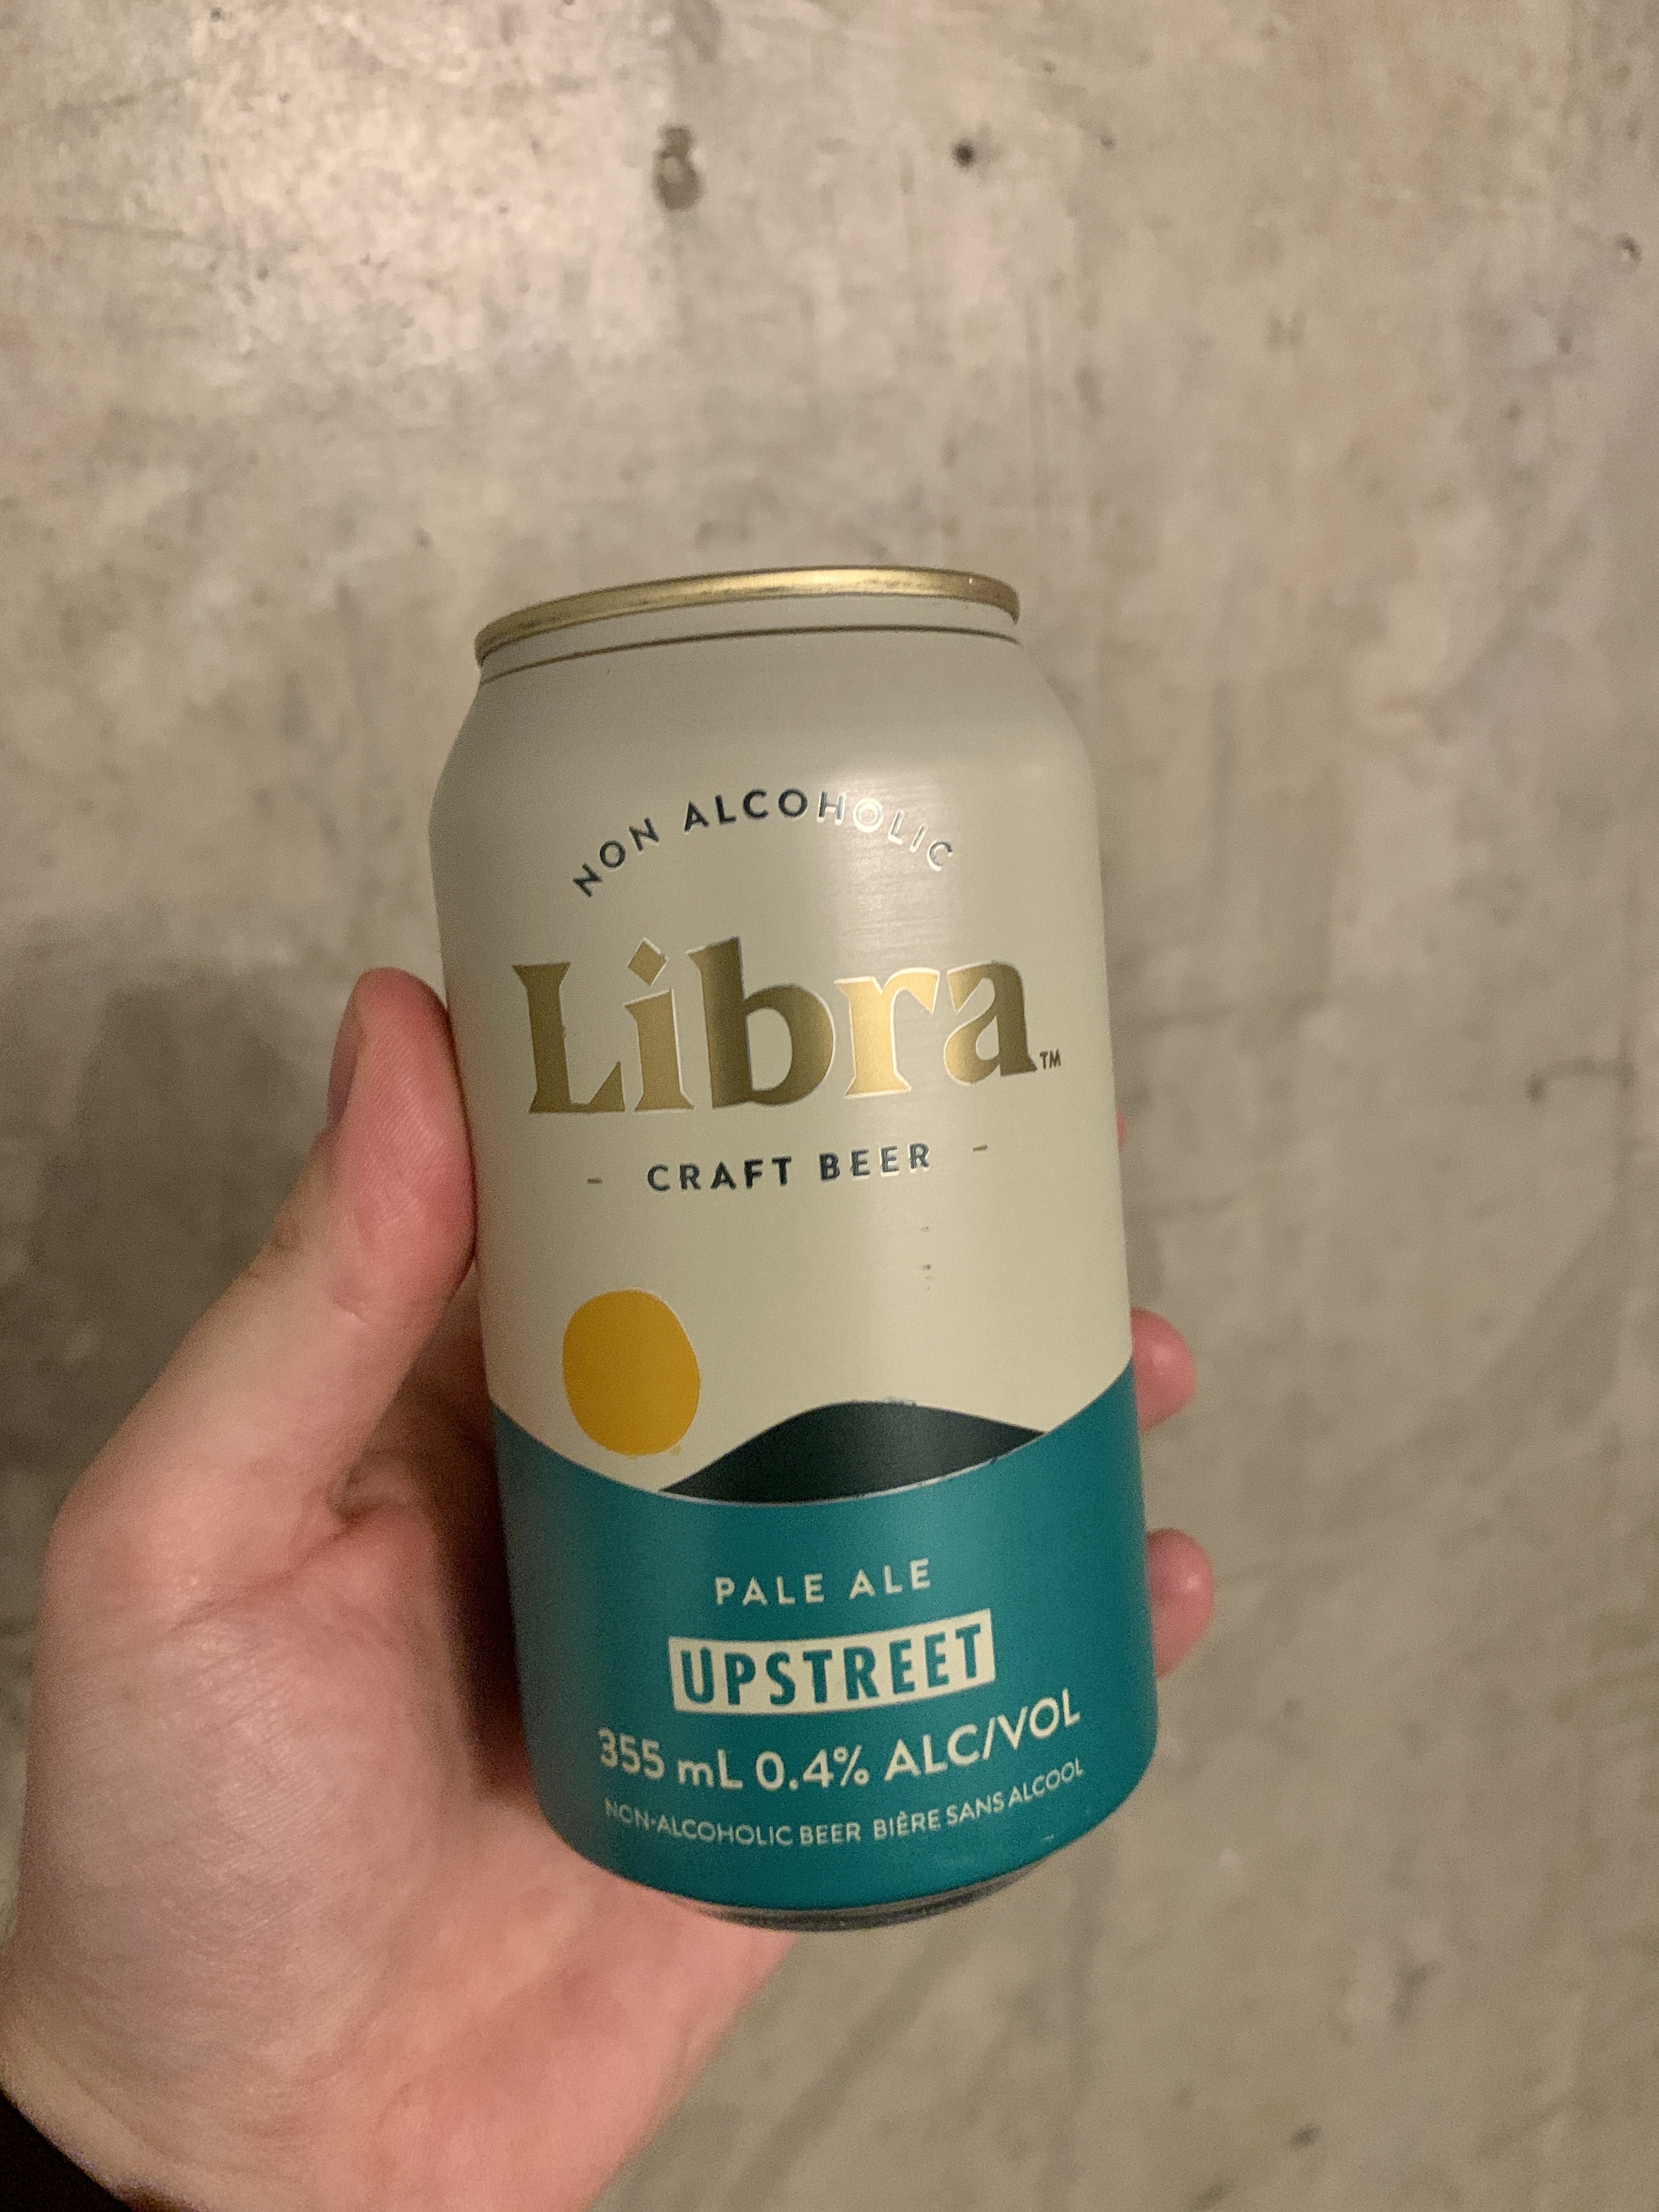 can of libra craft beer non-alc